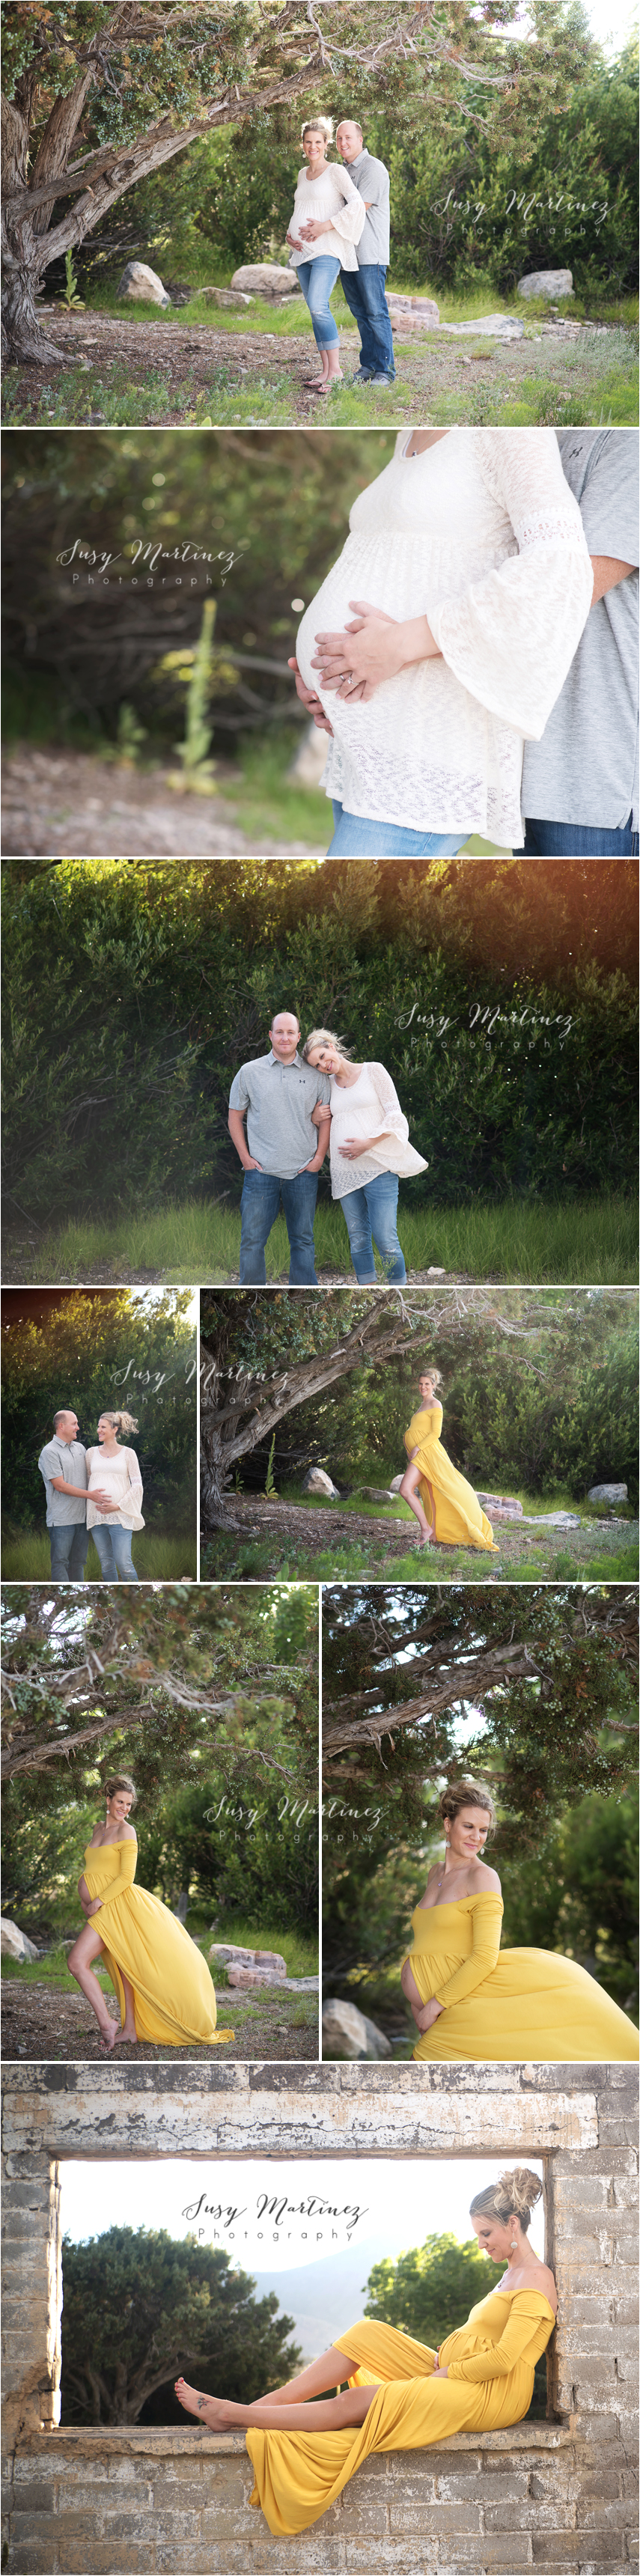 Beautiful Location for Maternity Session | Susy Martinez Photography